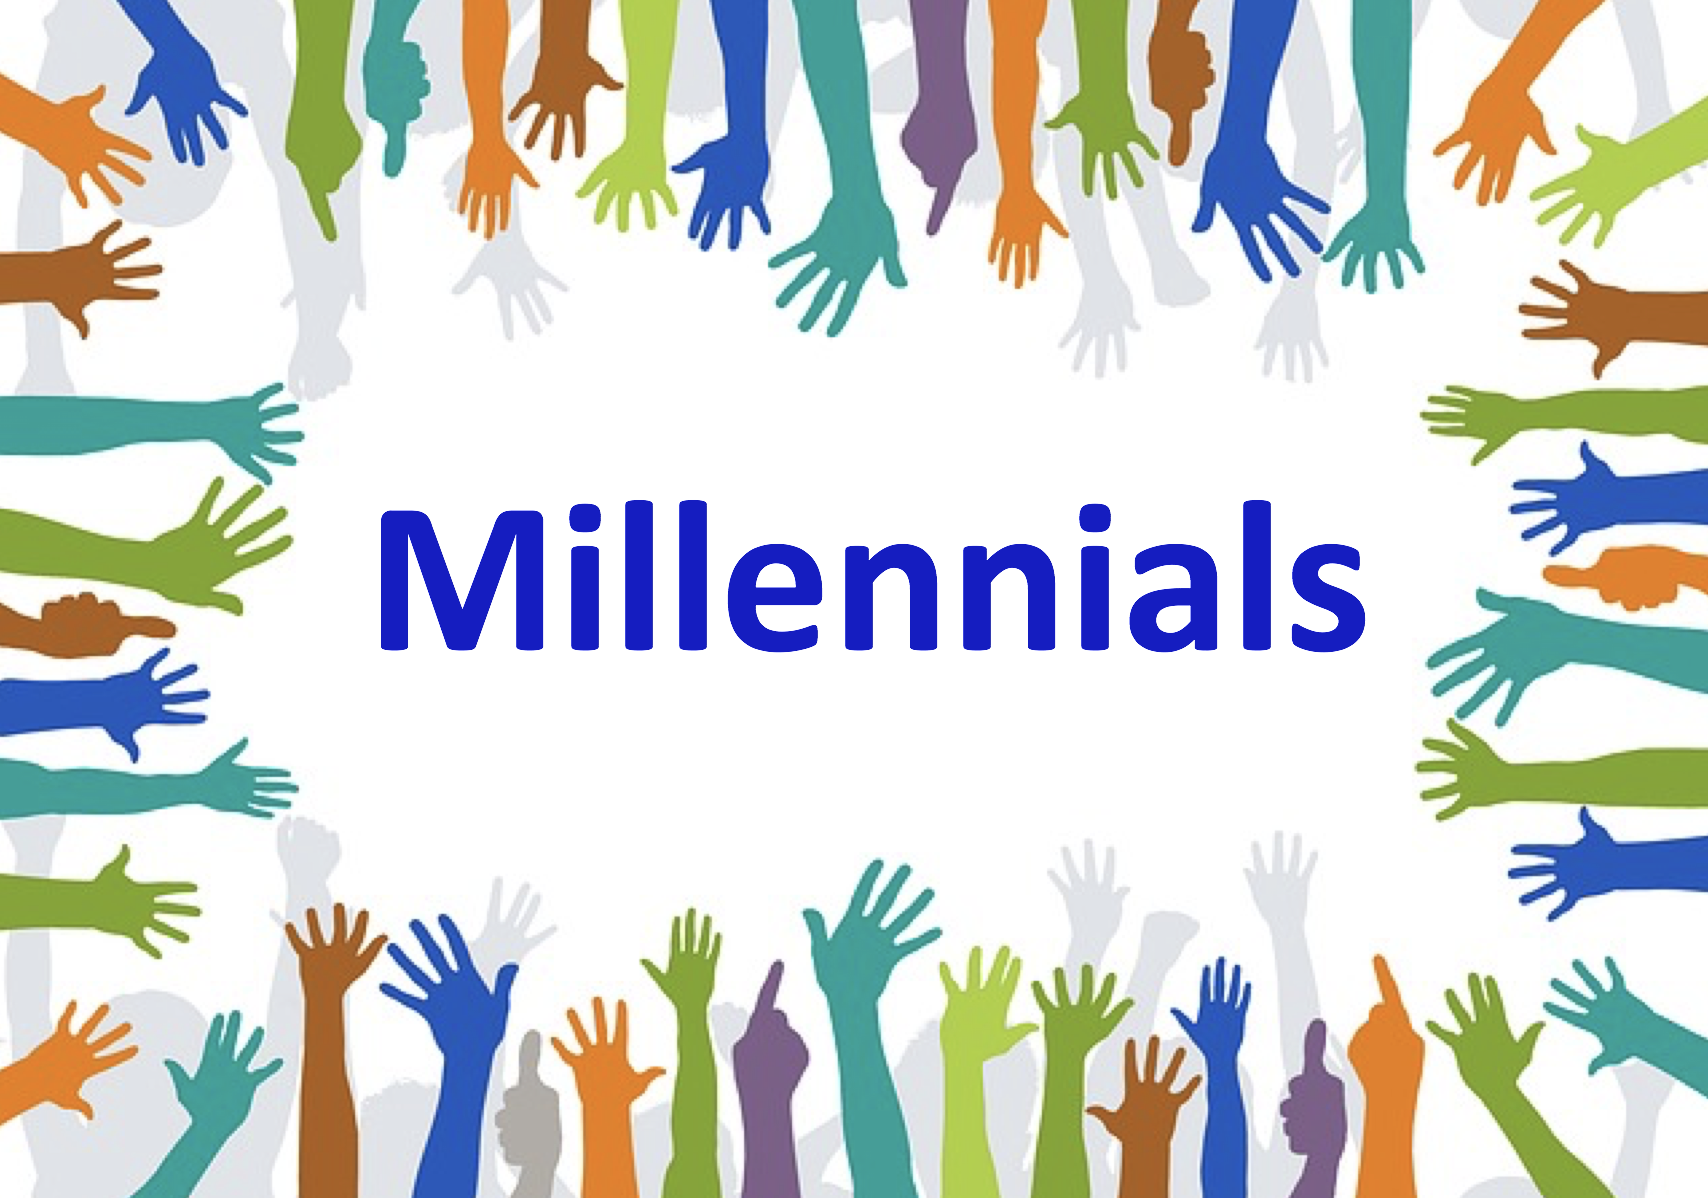 Image of hands all around the edge with the word Millennial in the middle